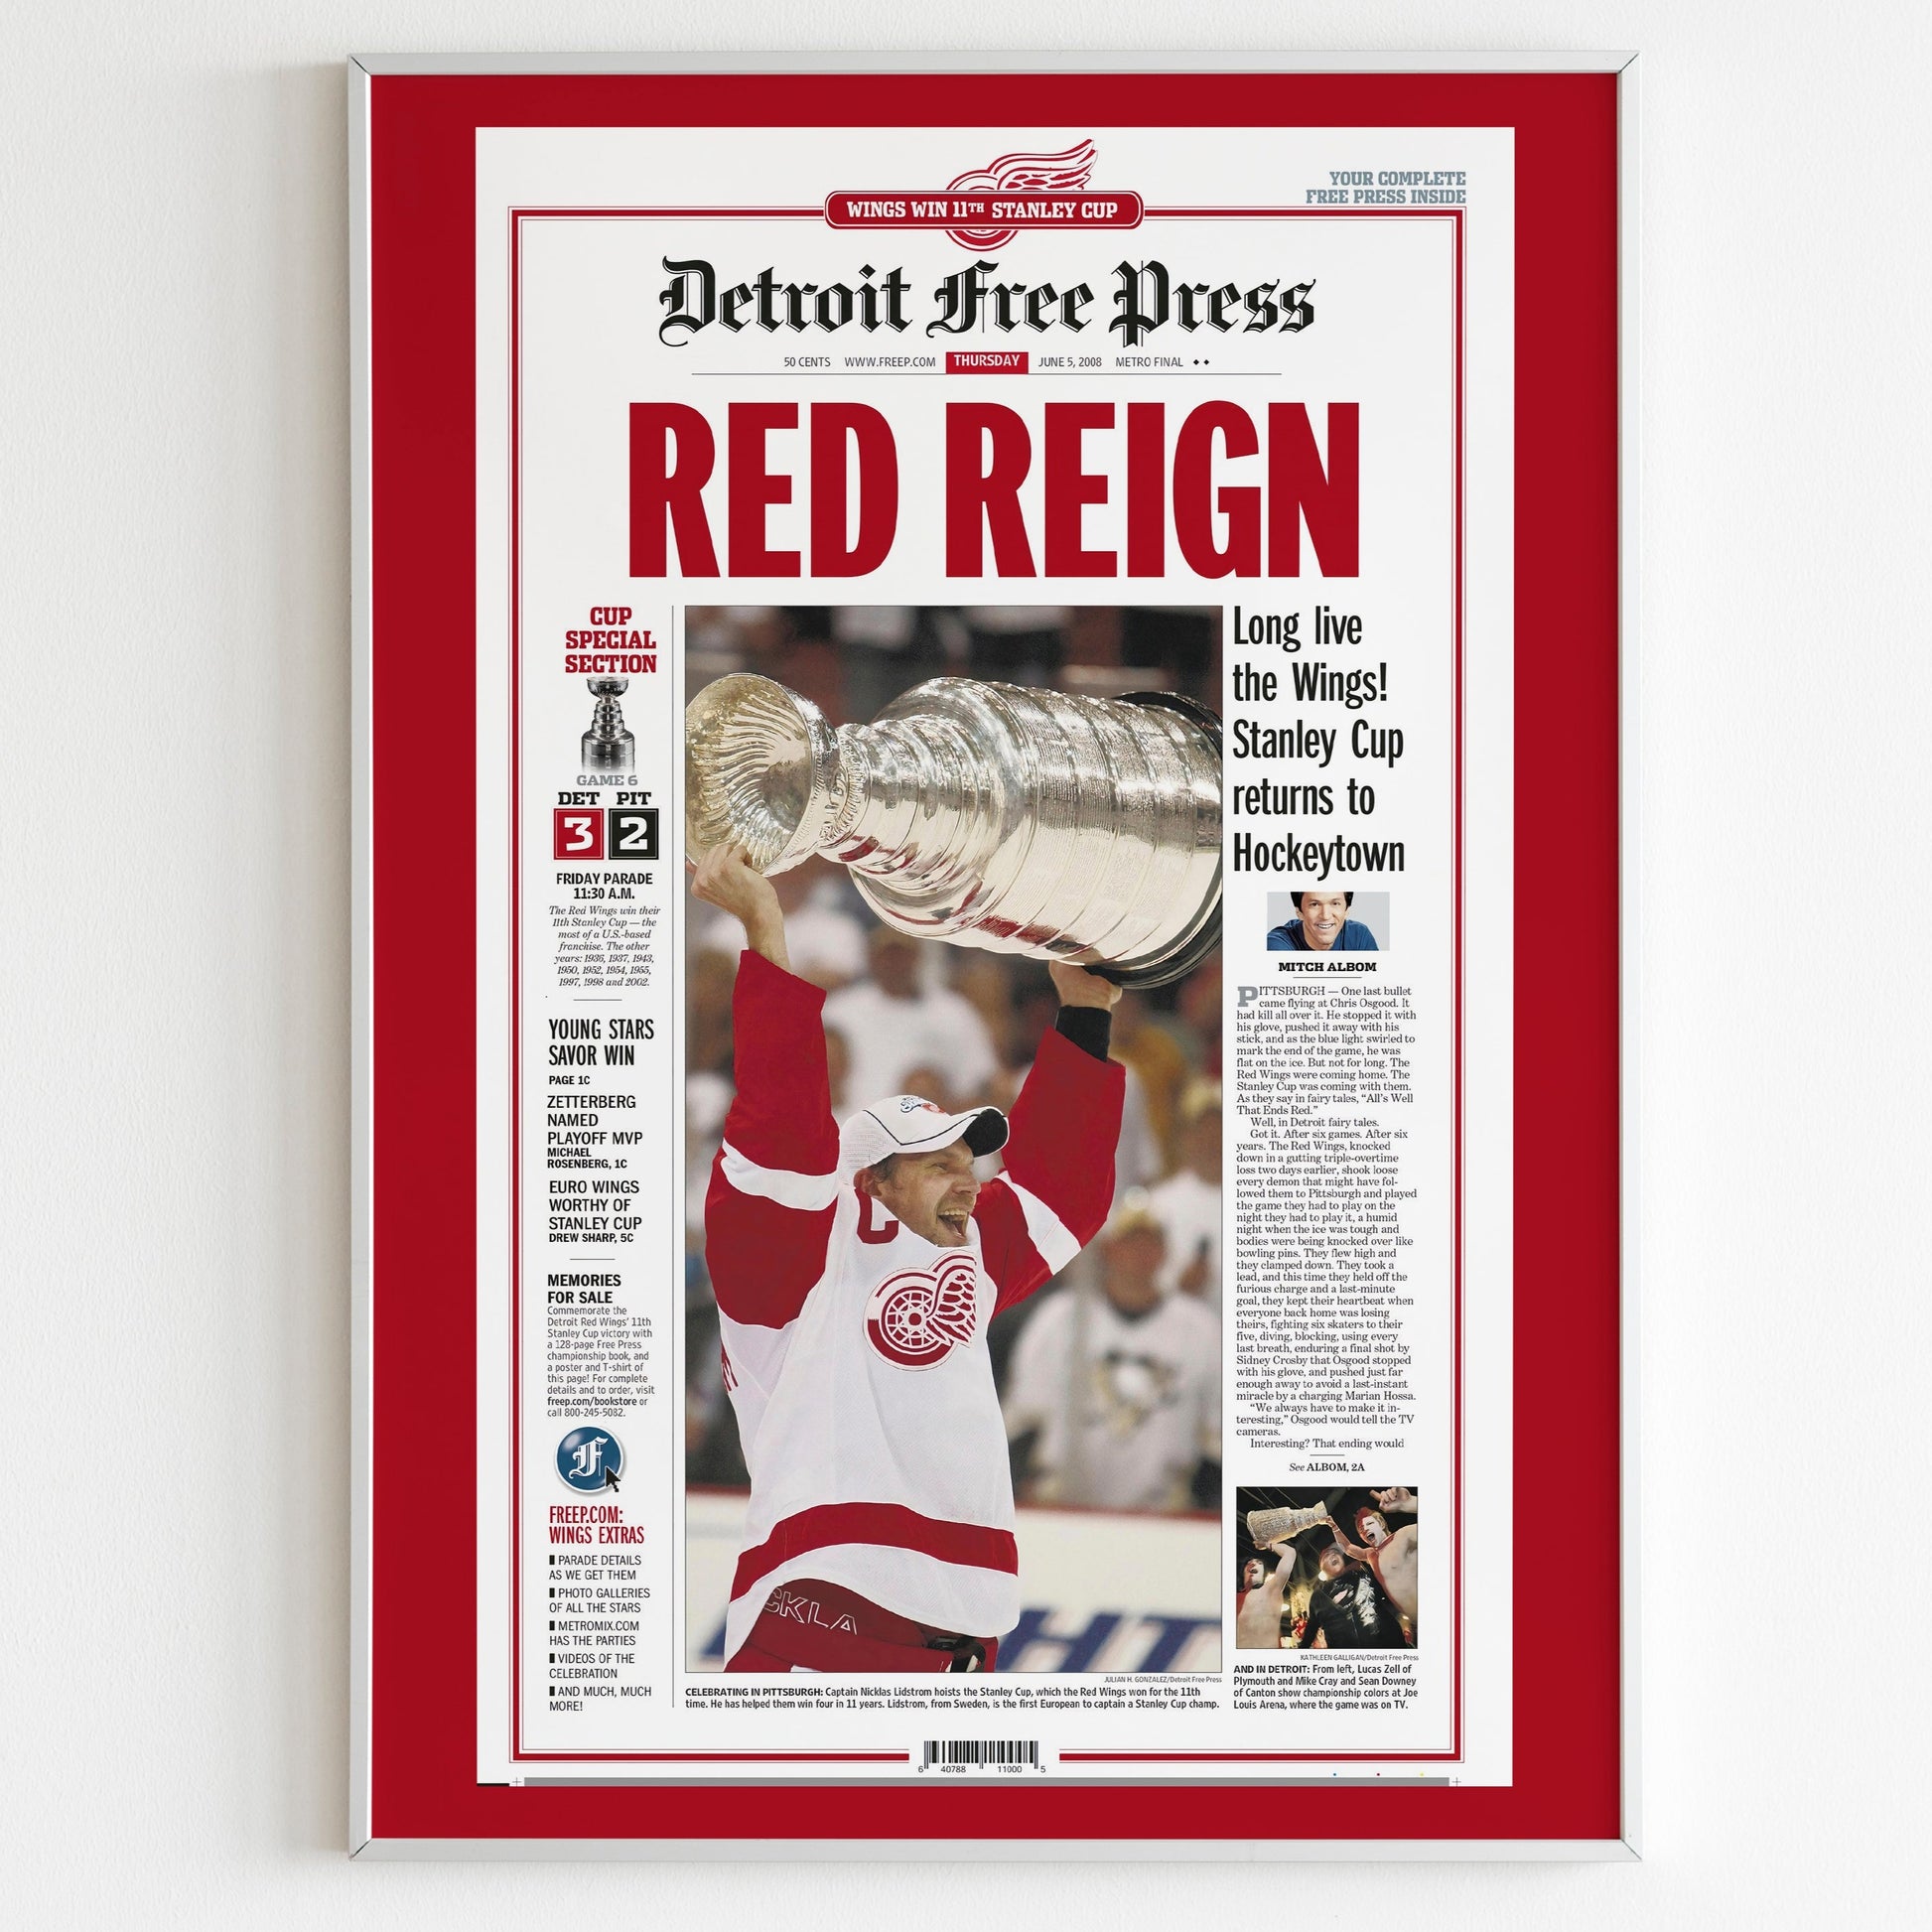 Detroit Red Wings 2008 NHL Stanley Cup Champions Front Cover Detroit Free Press Poster, Hockey Team Magazine Print, Newspaper Front Page